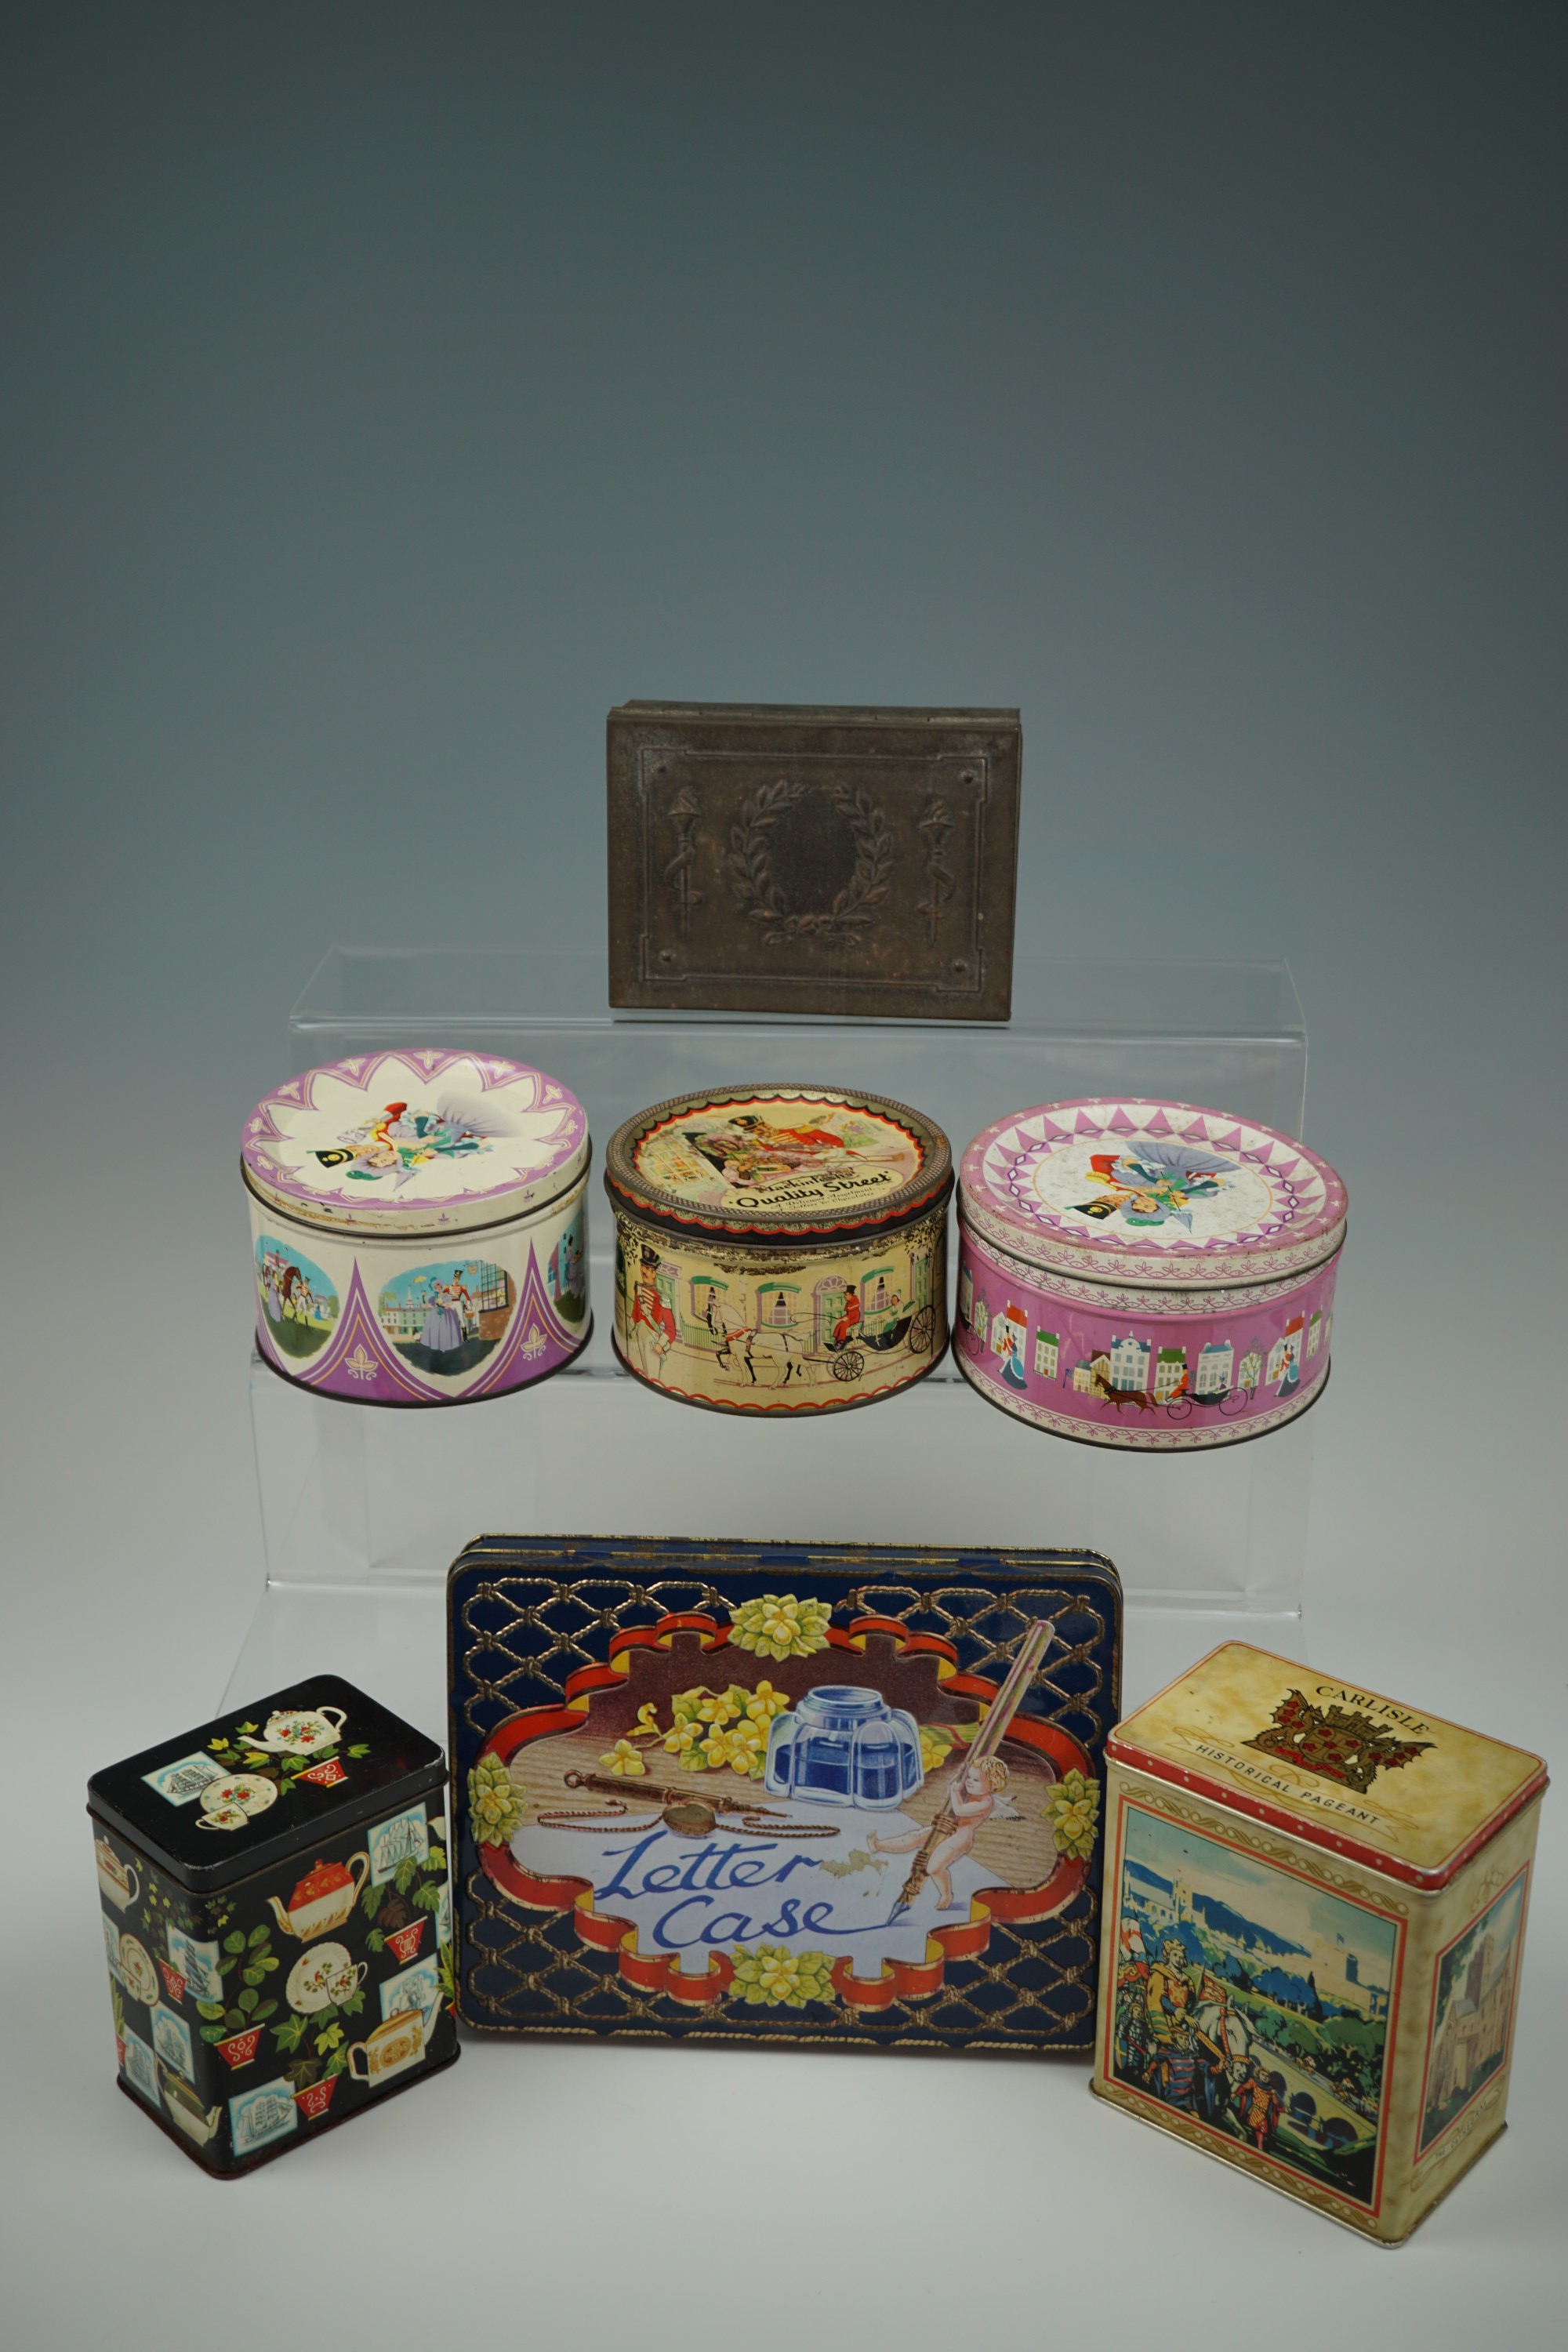 Sundry vintage and other tinplate boxes including an embossed and printed "letter case" and a